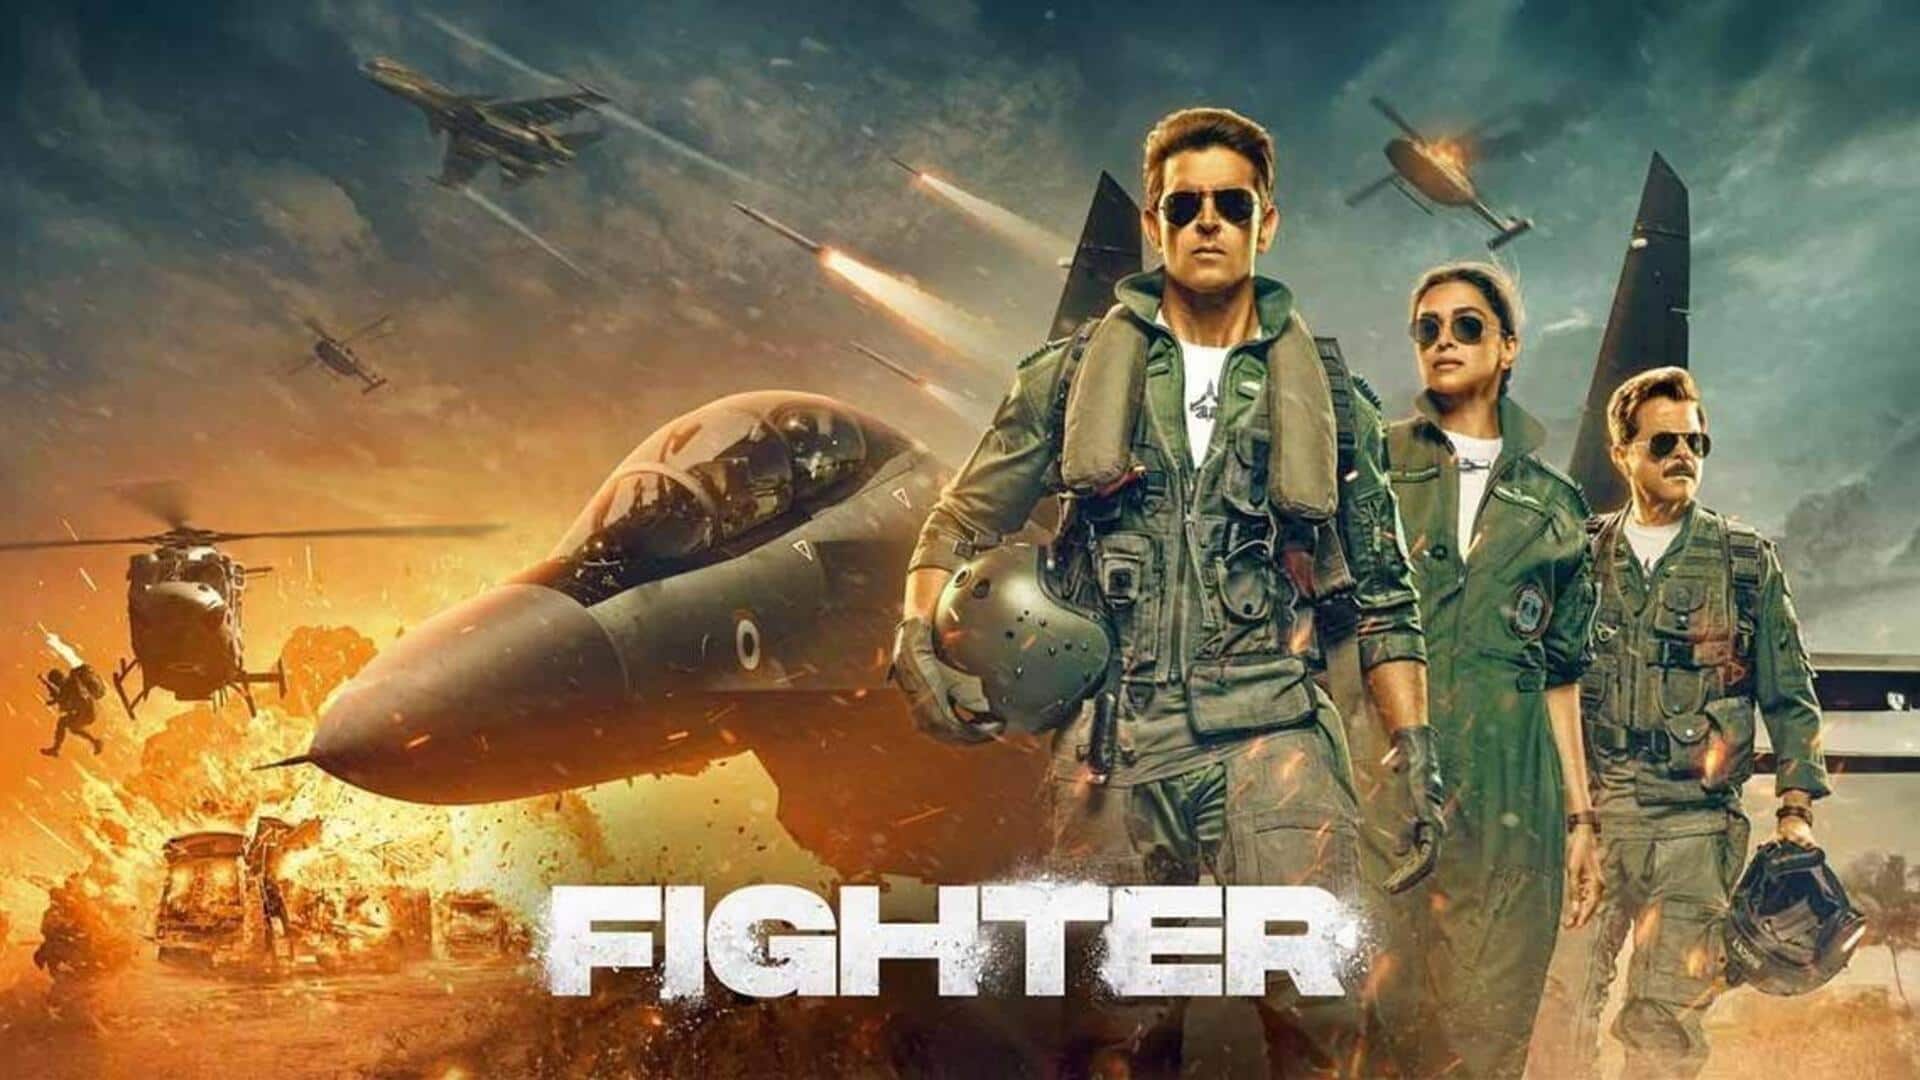 Advance bookings for 'Fighter' commence, surpass Rs. 1 crore mark